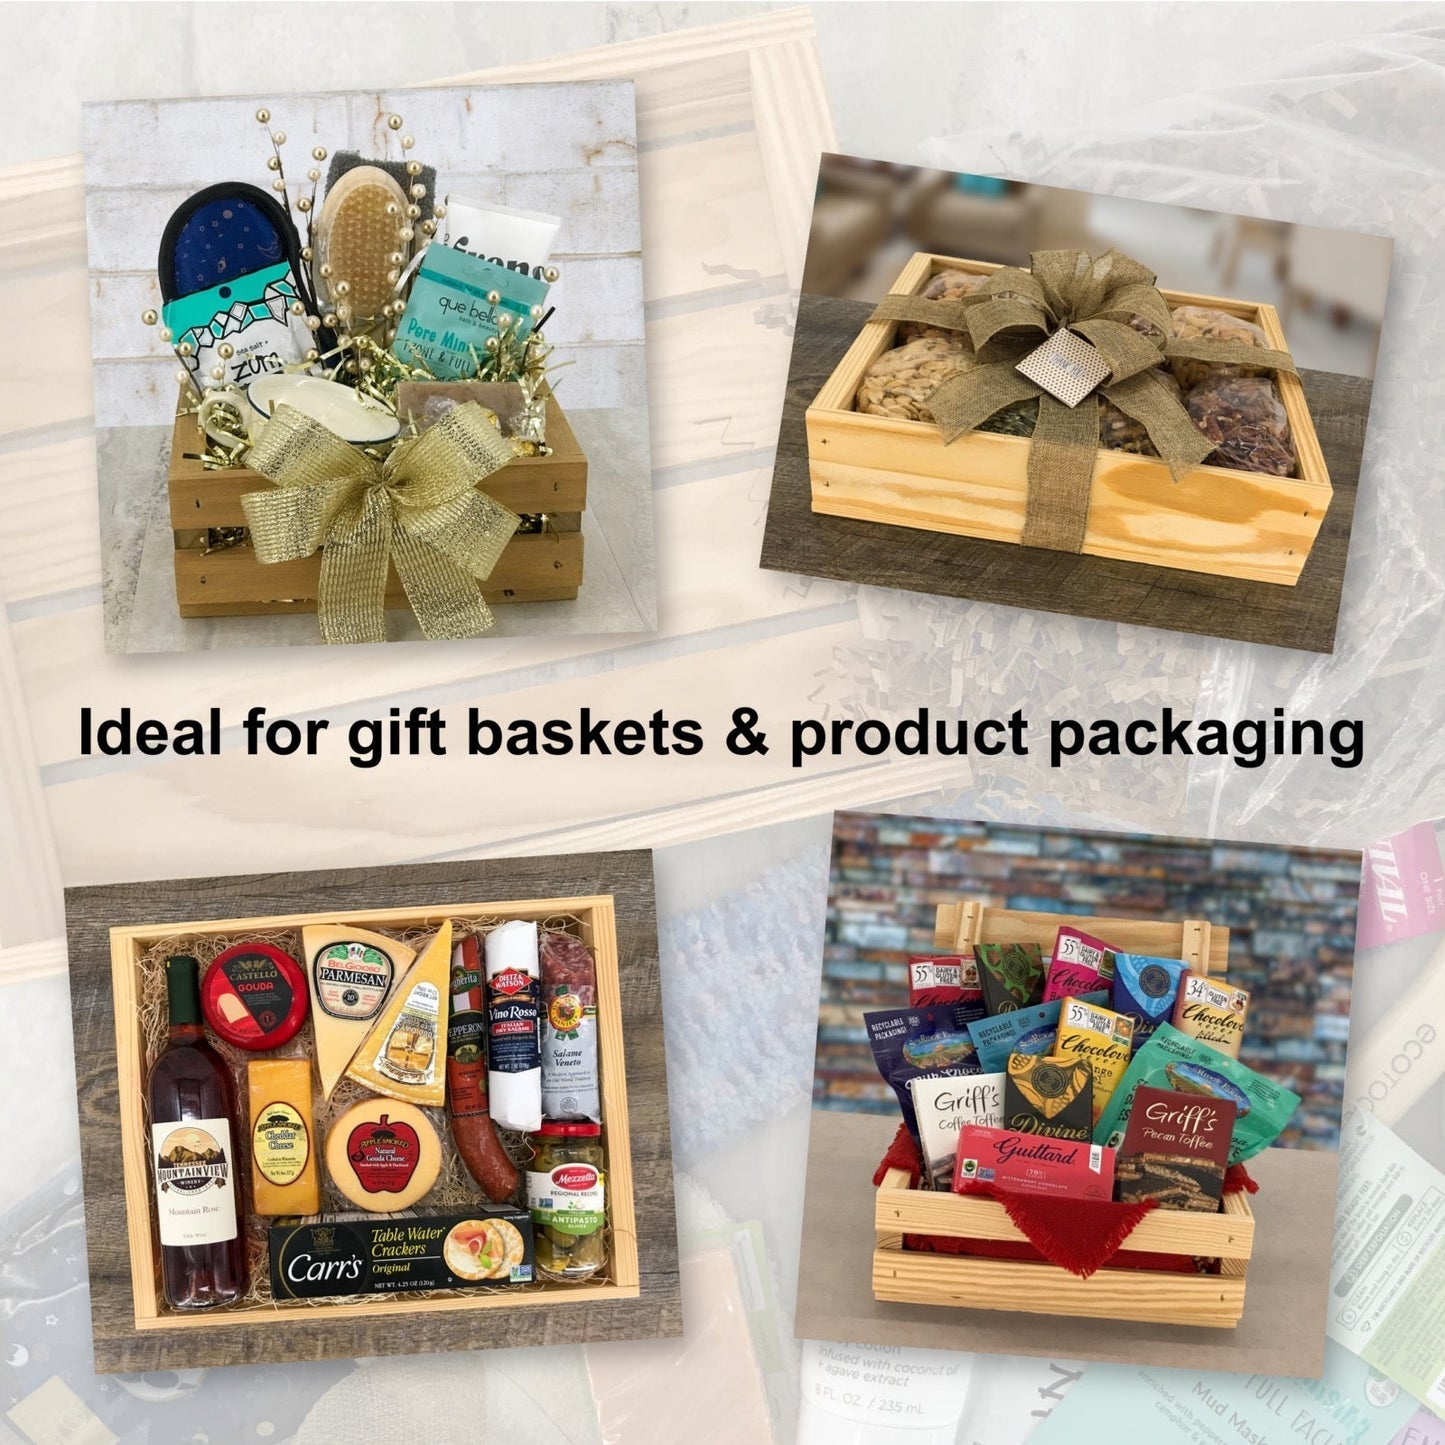 Ideal for gift baskets and product packaging, B2-14.375-10.78125-4.3125-ST-NW-LL, 6-B2-14.375-10.78125-4.3125-ST-NW-LL, 12-B2-14.375-10.78125-4.3125-ST-NW-LL, 24-B2-14.375-10.78125-4.3125-ST-NW-LL, 48-B2-14.375-10.78125-4.3125-ST-NW-LL, 96-B2-14.375-10.78125-4.3125-ST-NW-LL